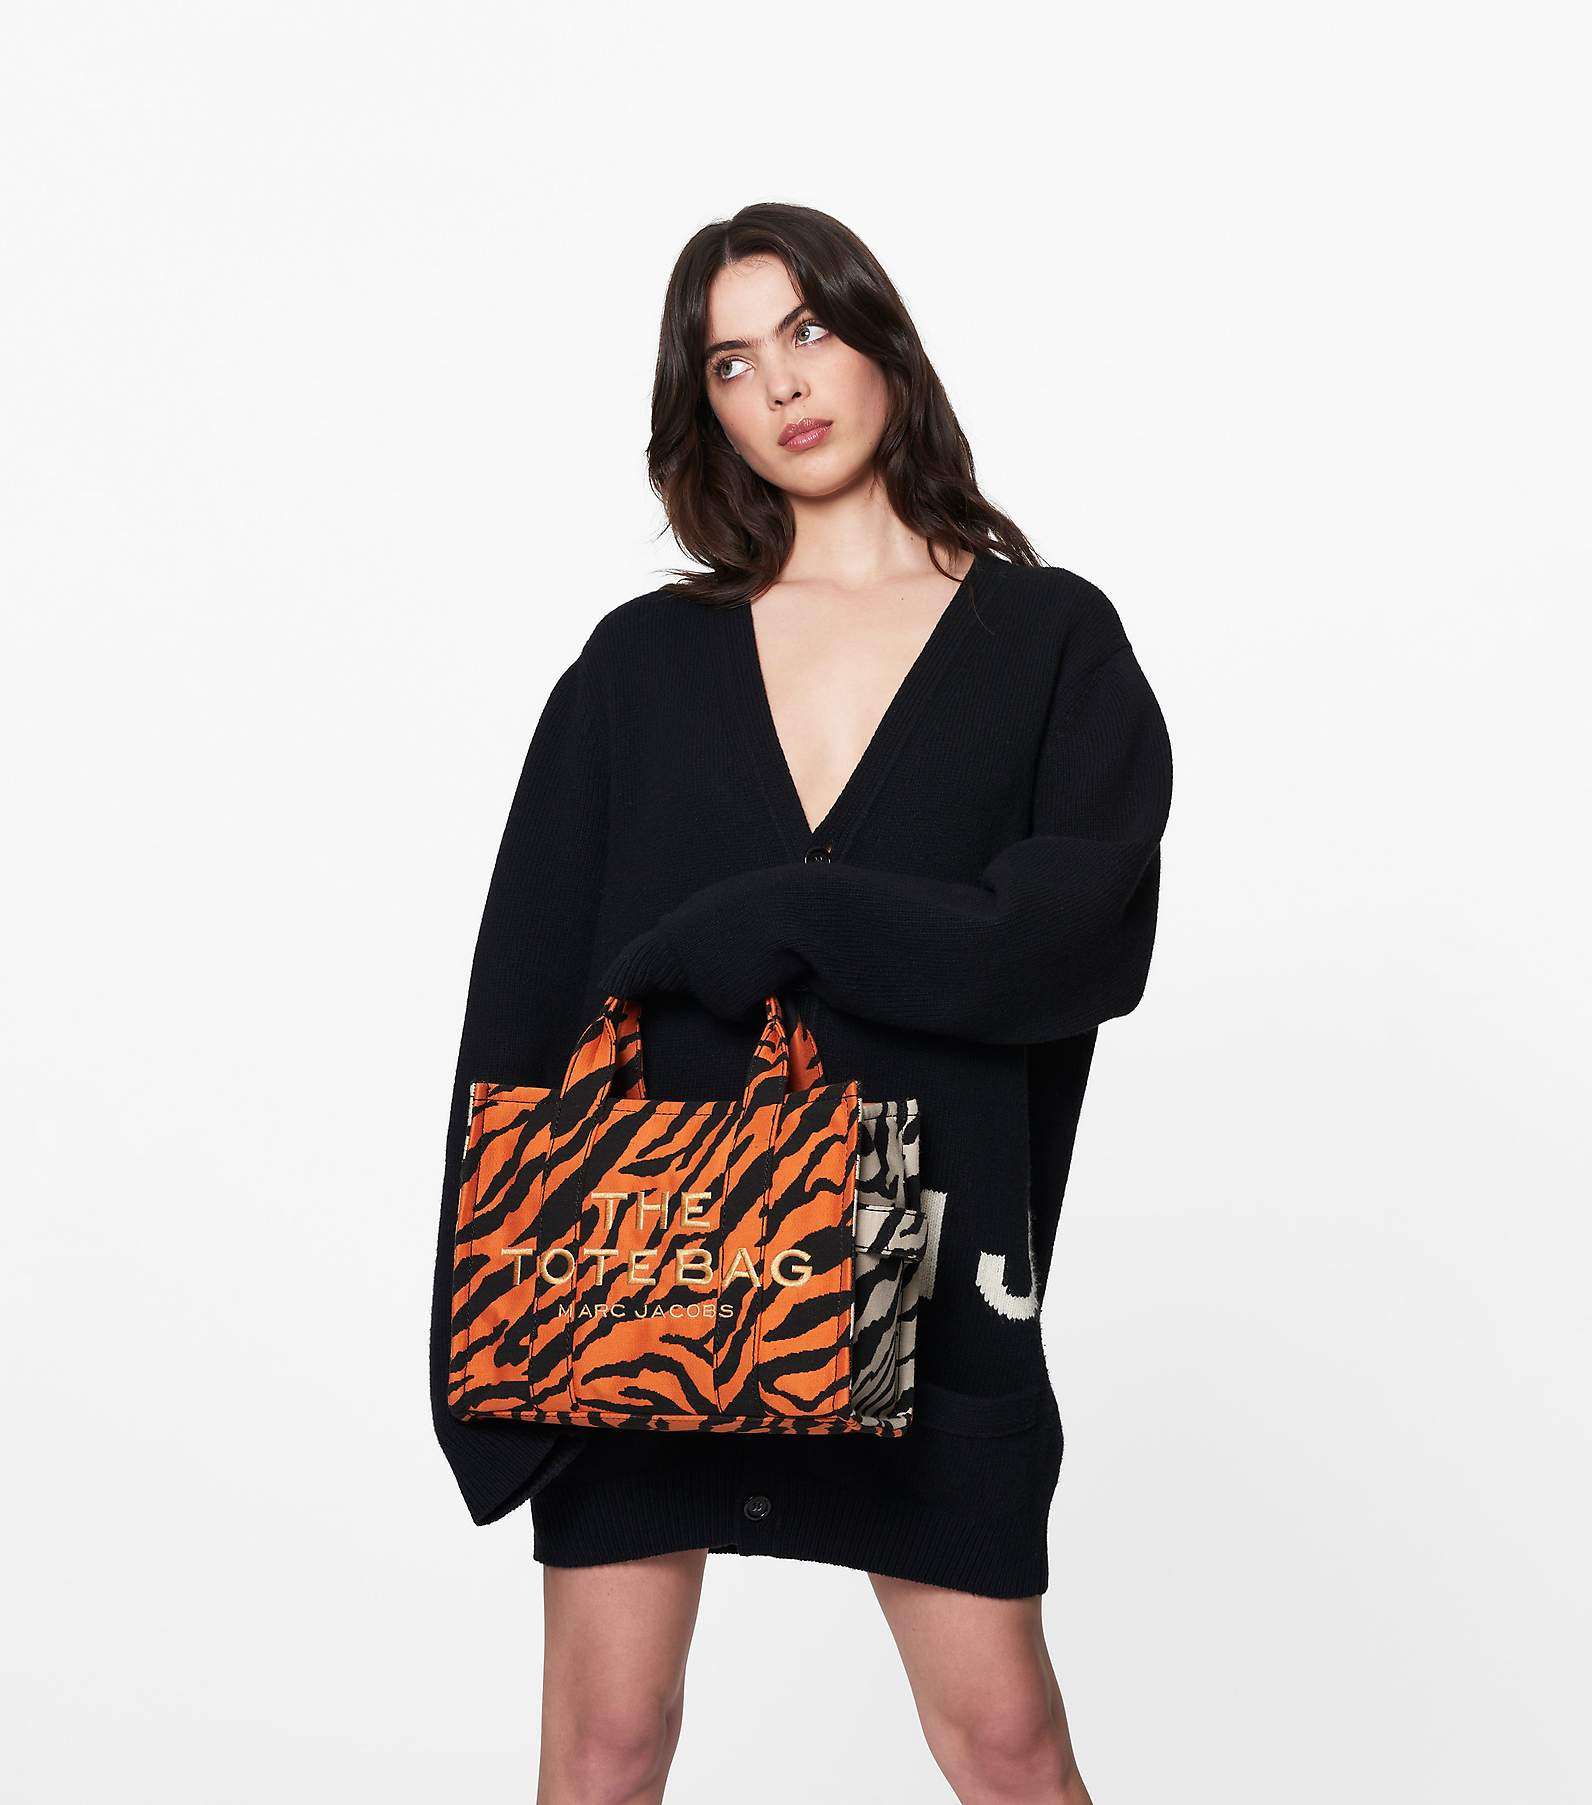 The Tiger Stripe Tote Bag, Marc Jacobs